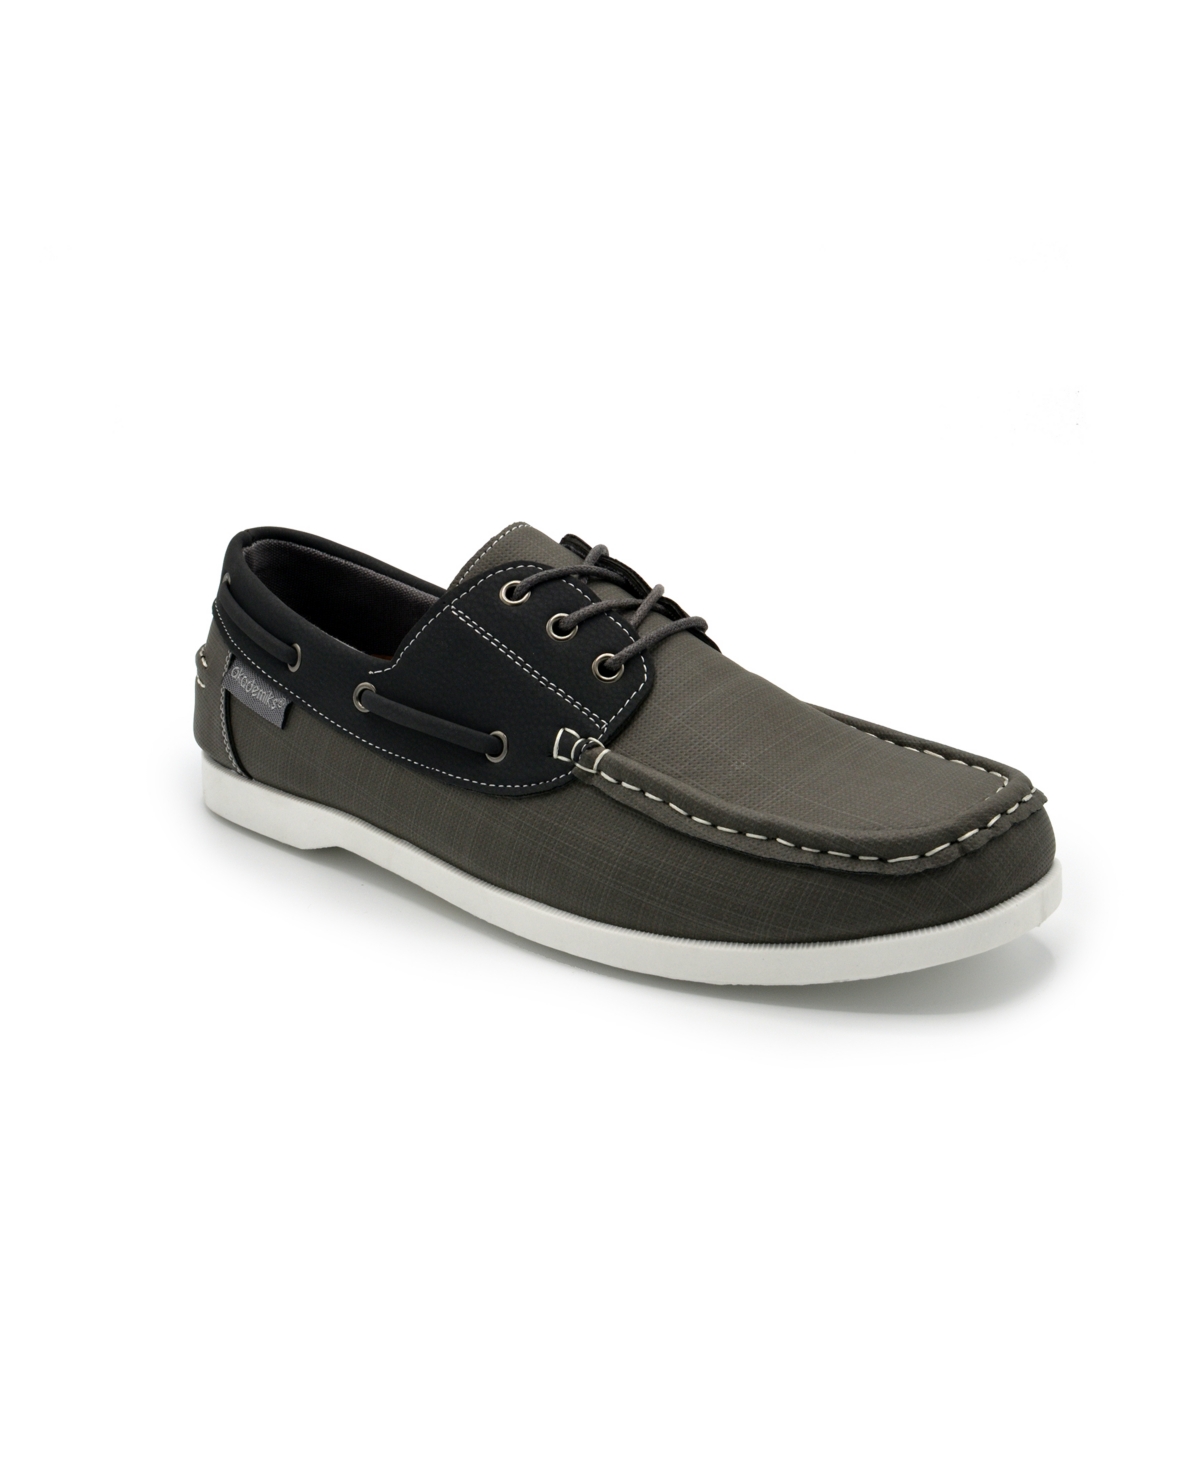 Akademiks Men's Marina 2.0 Lace-up Boat Shoes Men's Shoes In Gray